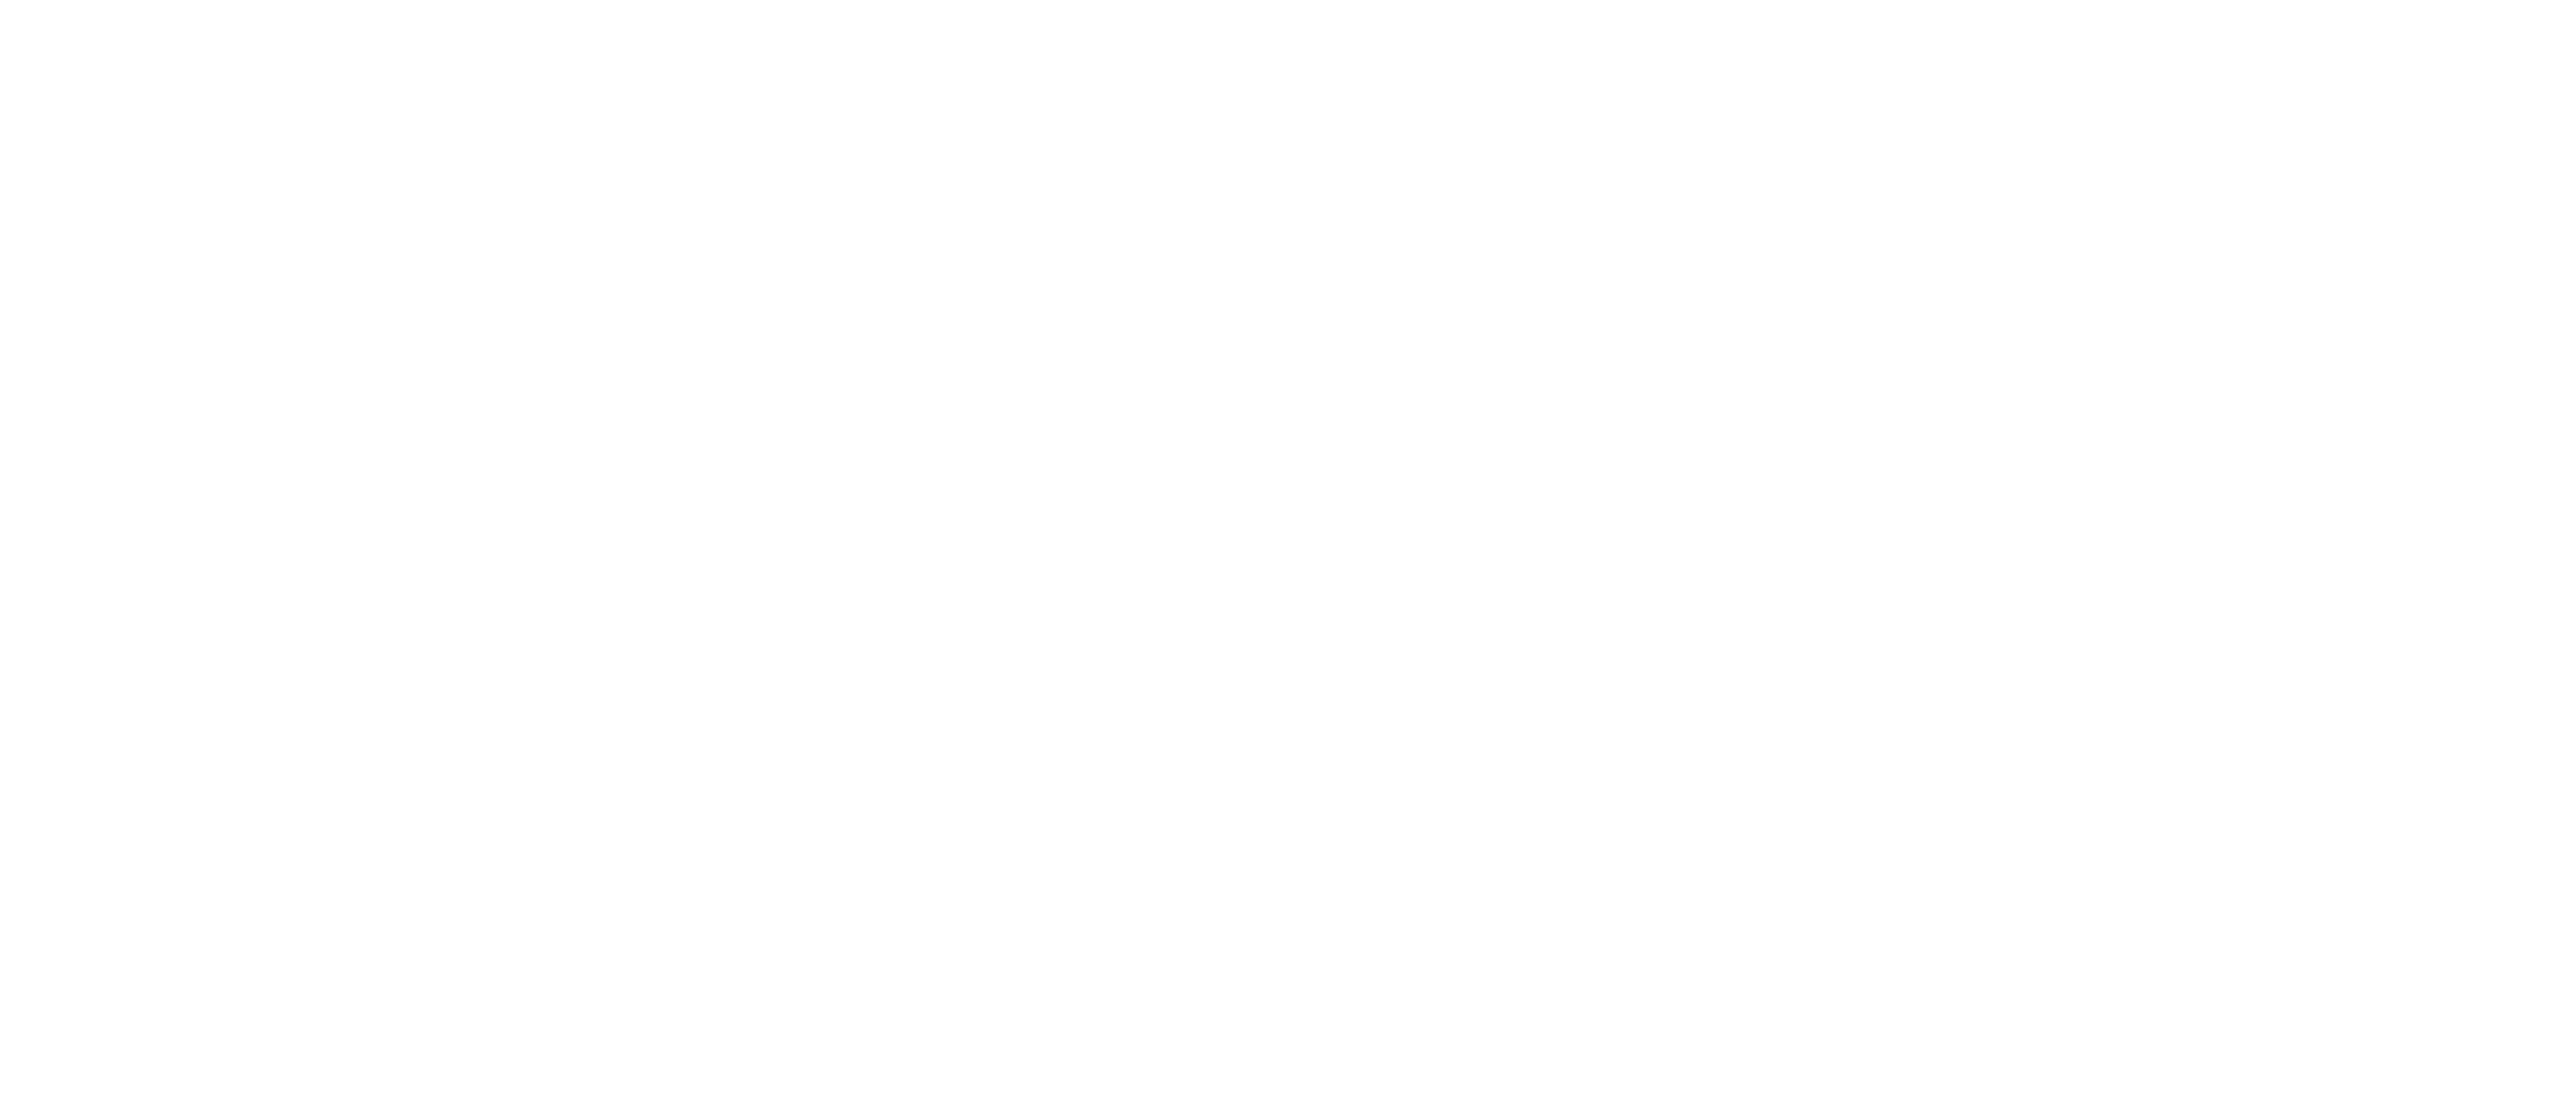 The Awesome Shopping Group